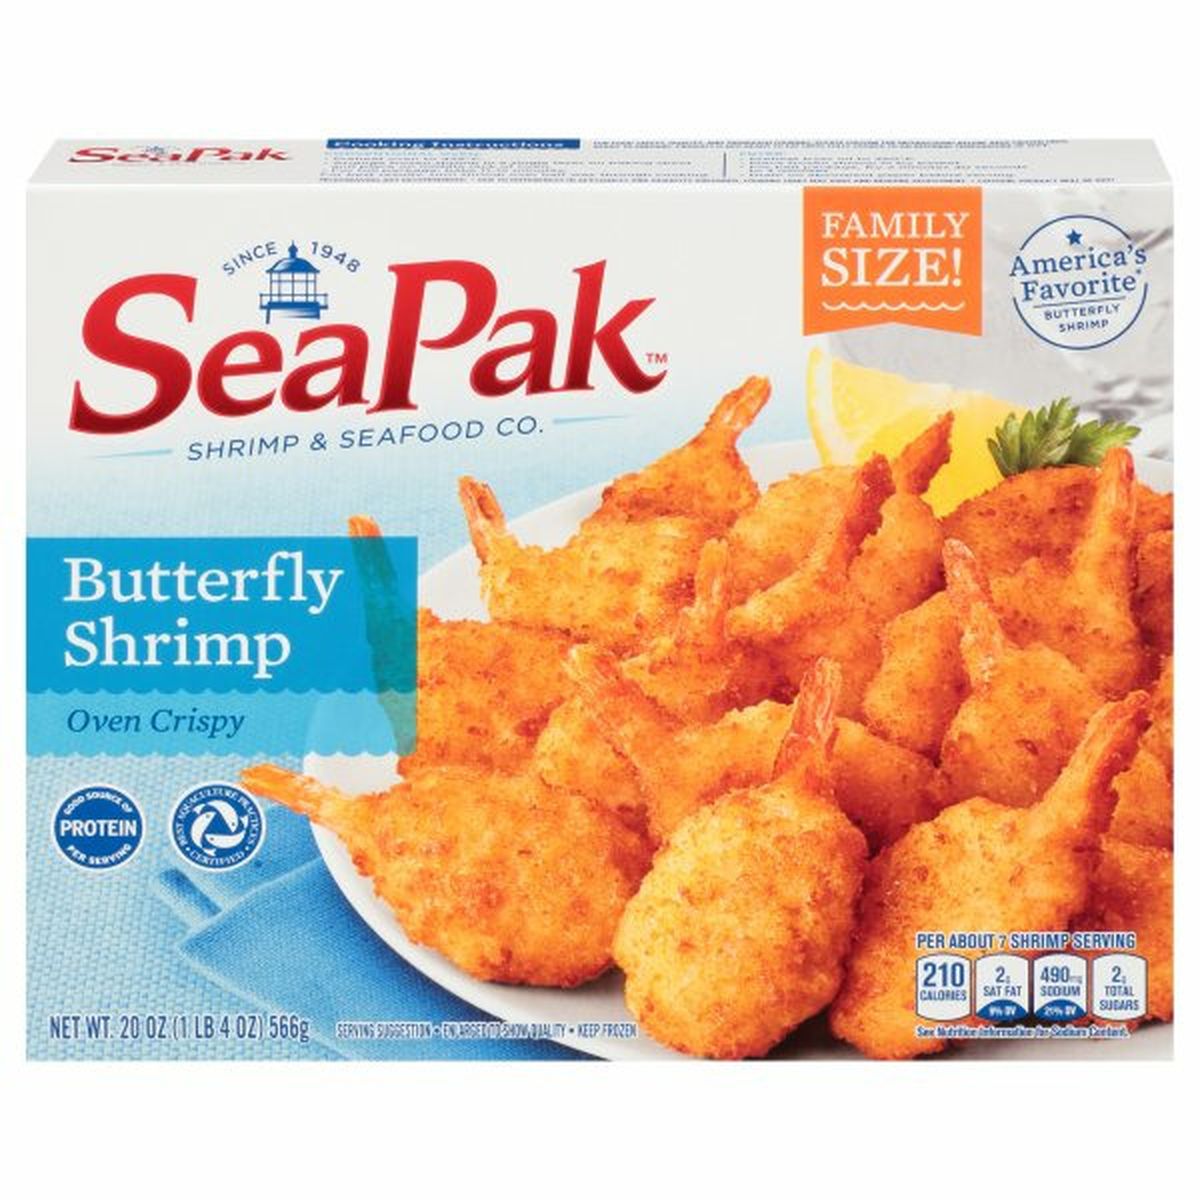 Calories in SeaPak Shrimp, Butterfly, Family Size